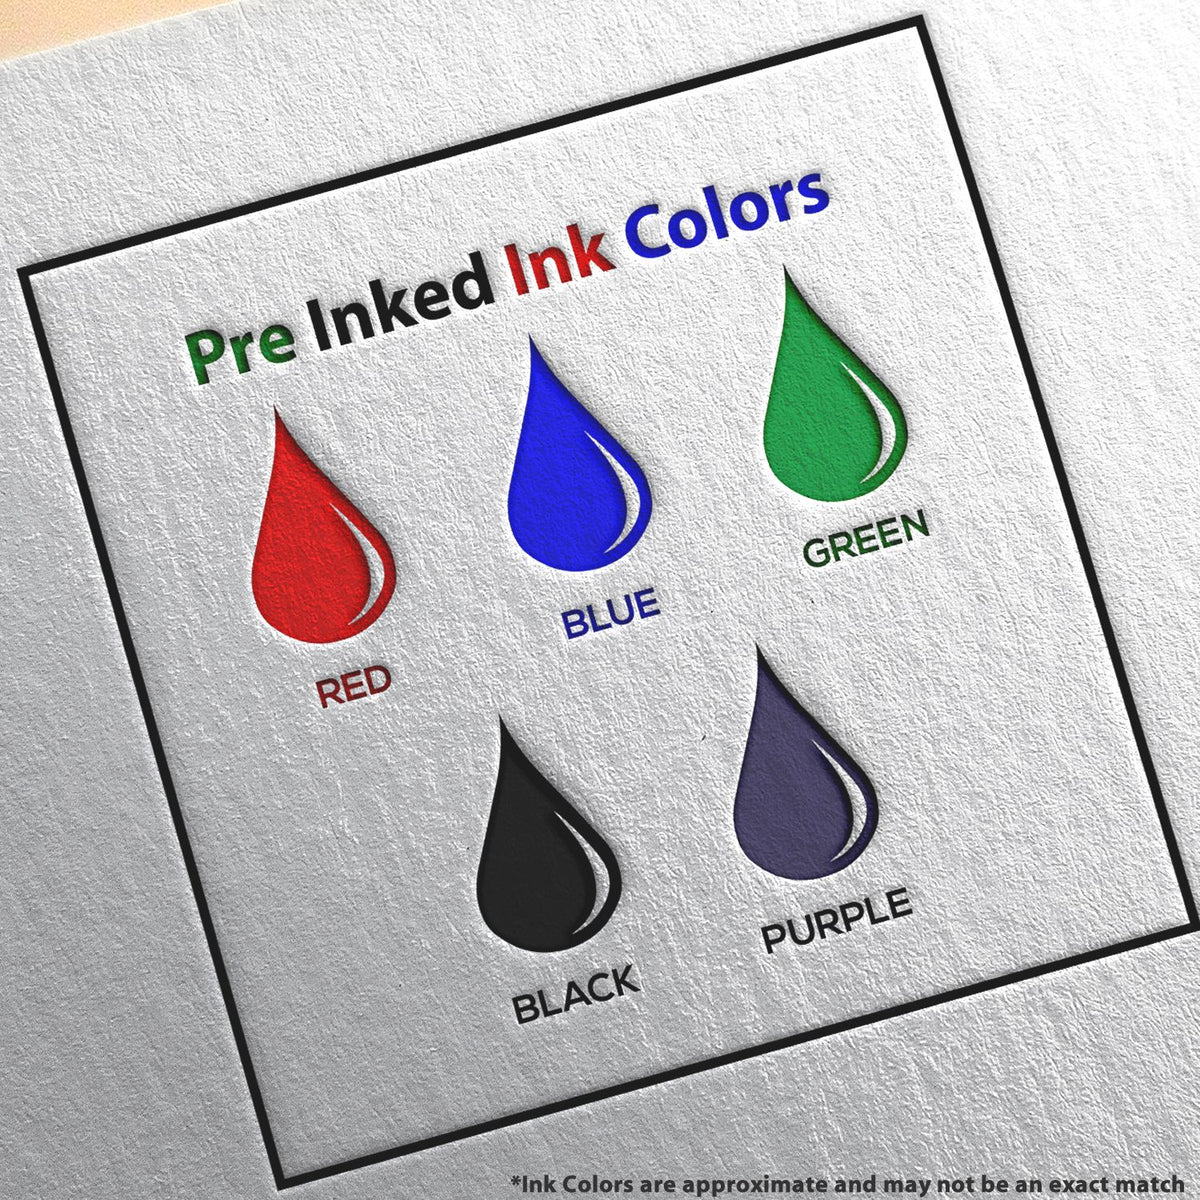 A picture showing the different ink colors or hues available for the MaxLight Premium Pre-Inked Maine State Seal Notarial Stamp product.